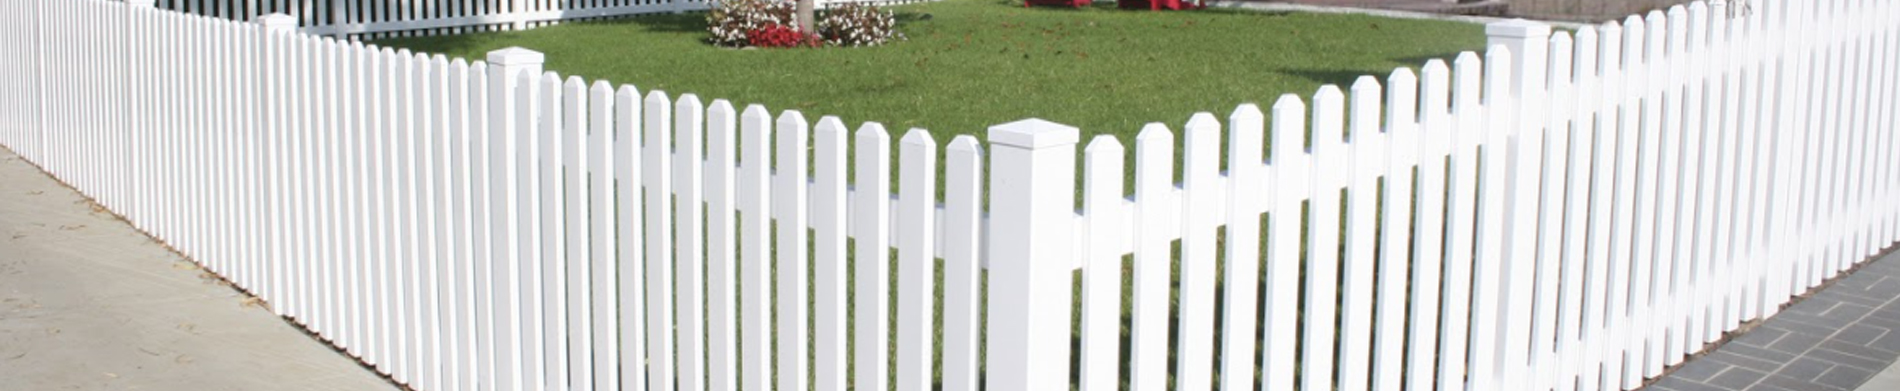 Installing a traditional vinyl fencing around your front yard and wall toppers to extend a low stone wall